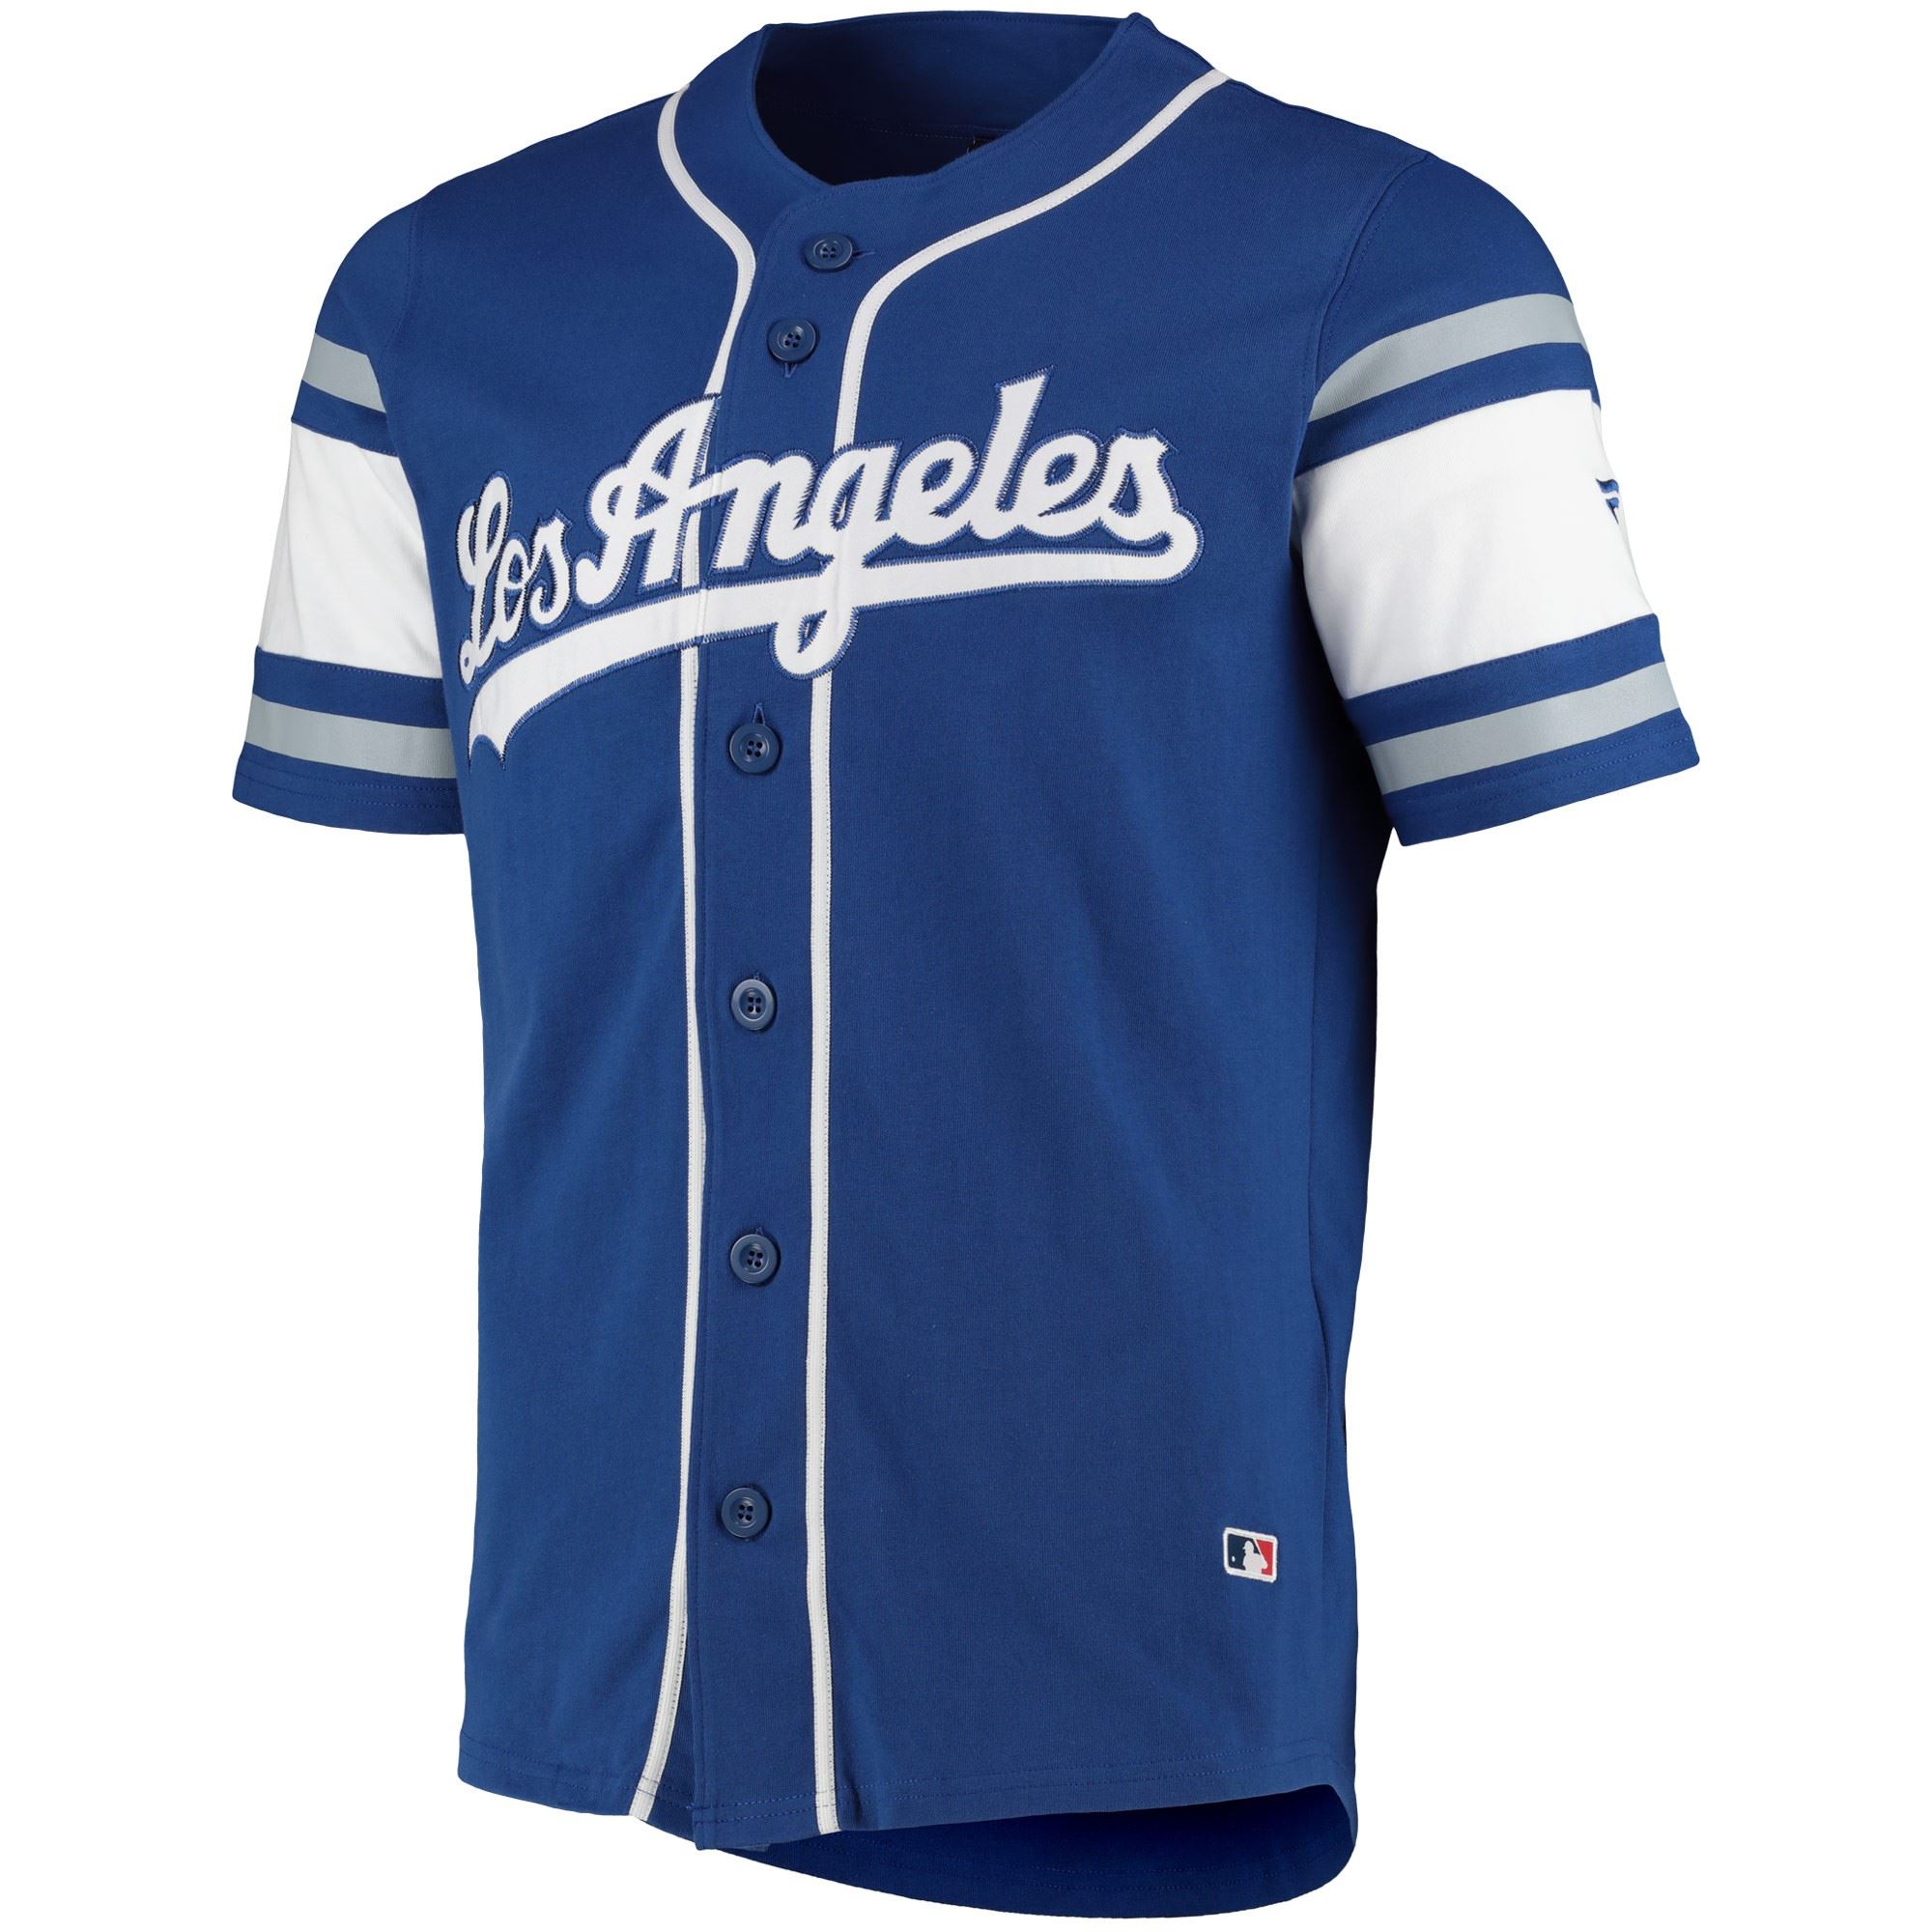 Los Angeles Dodgers MLB Cotton Supporters Jersey Fanatics